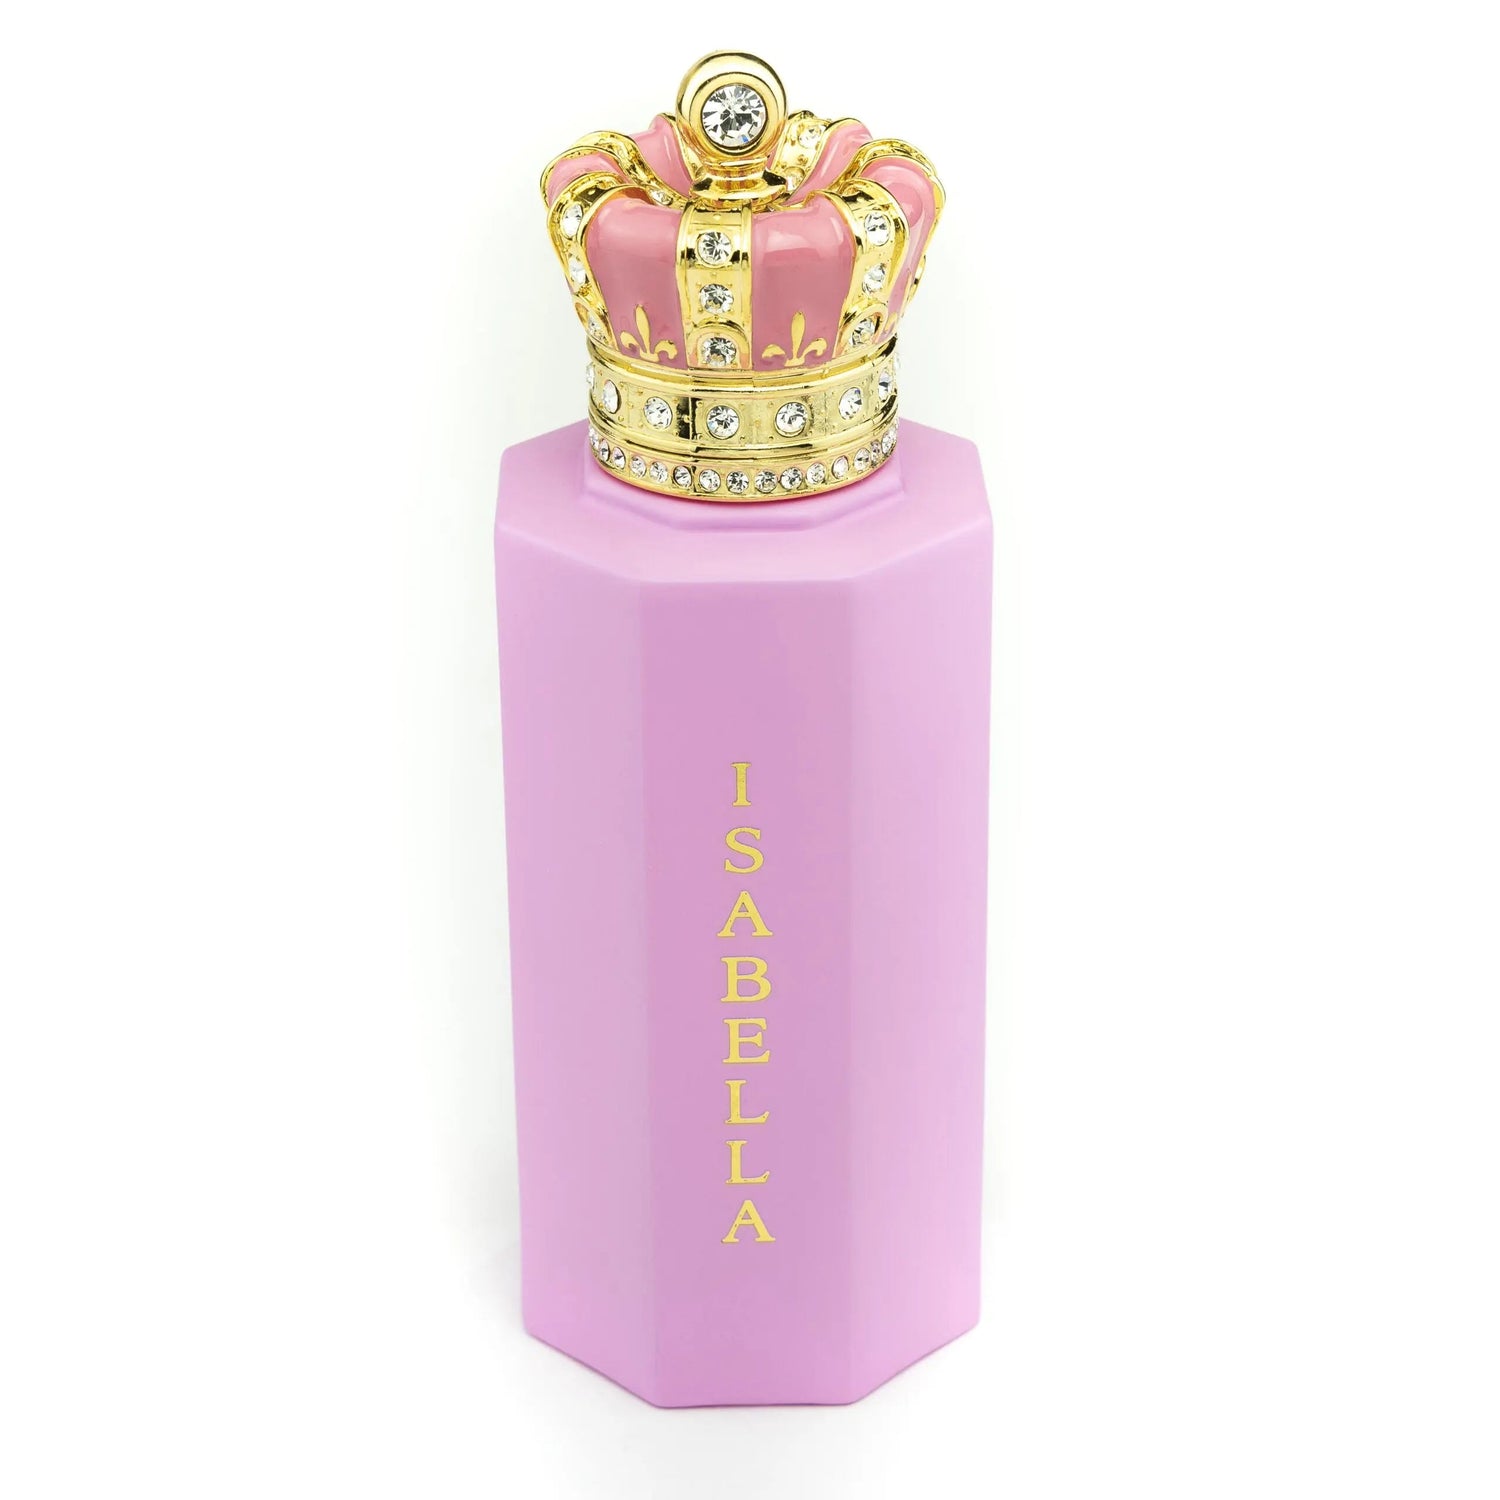 Couronne Royale Isabelle - 100 ml